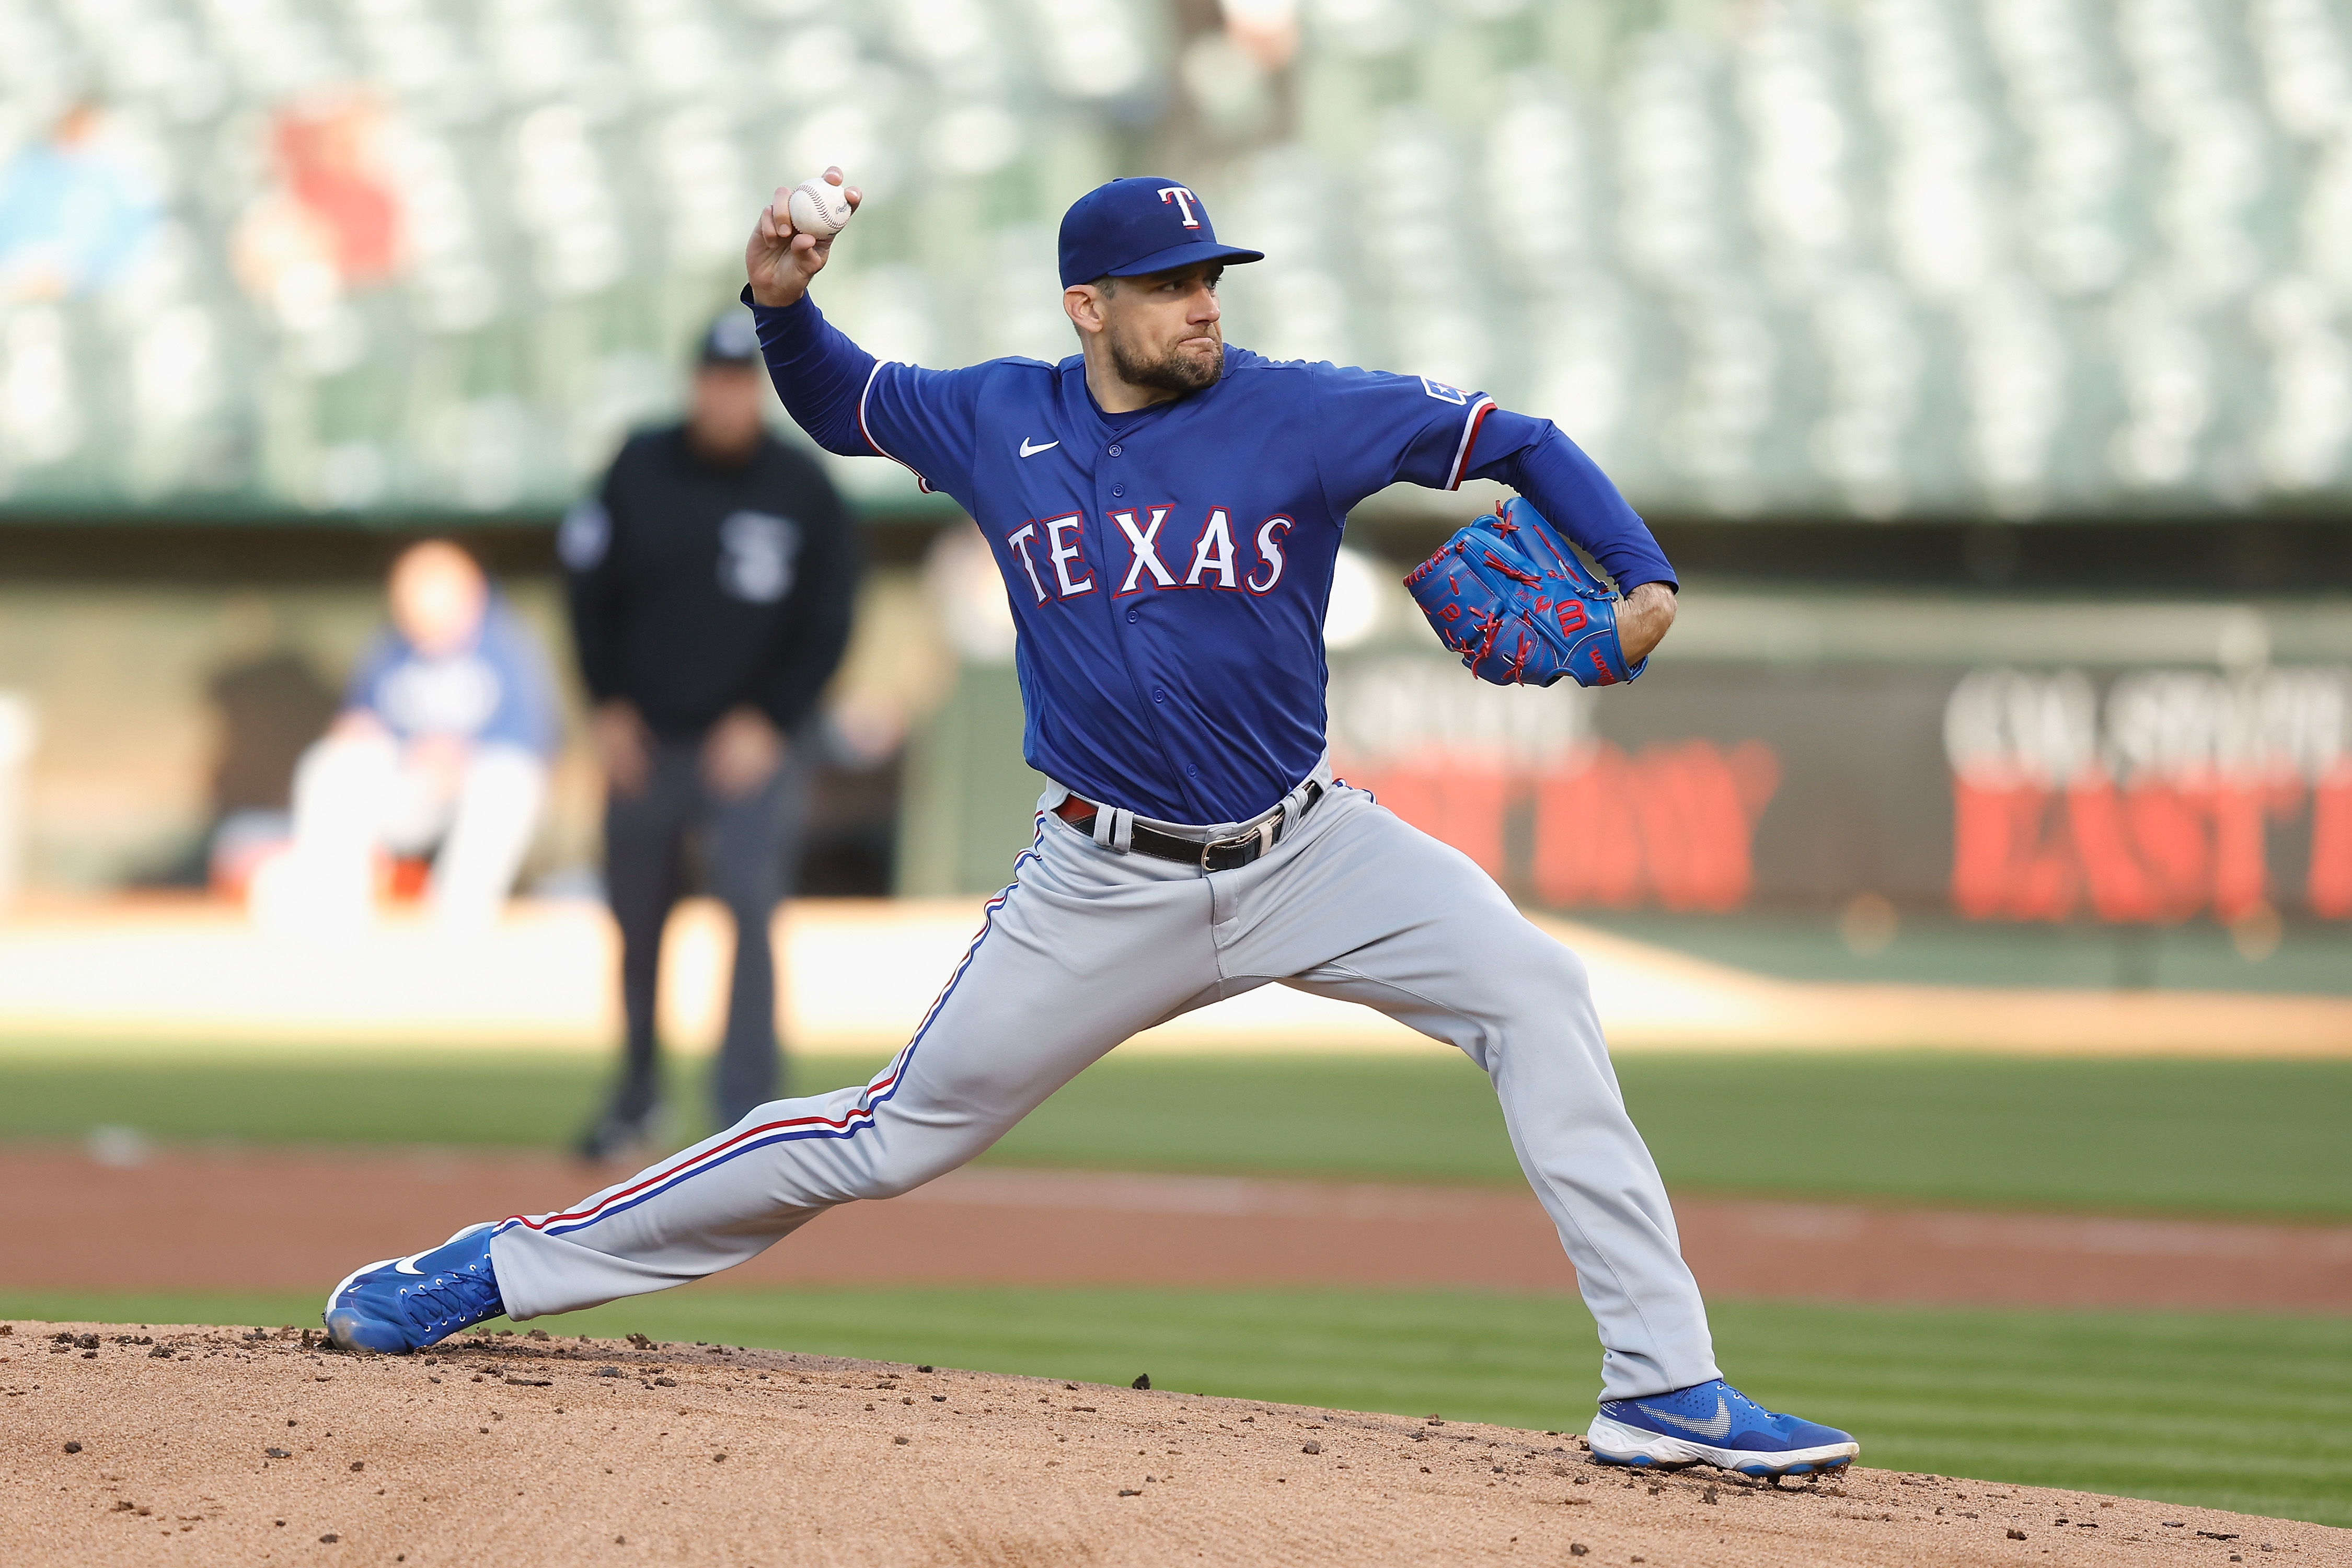 Nathan Eovaldi works around some trouble, picks up the win in Texas Rangers  debut